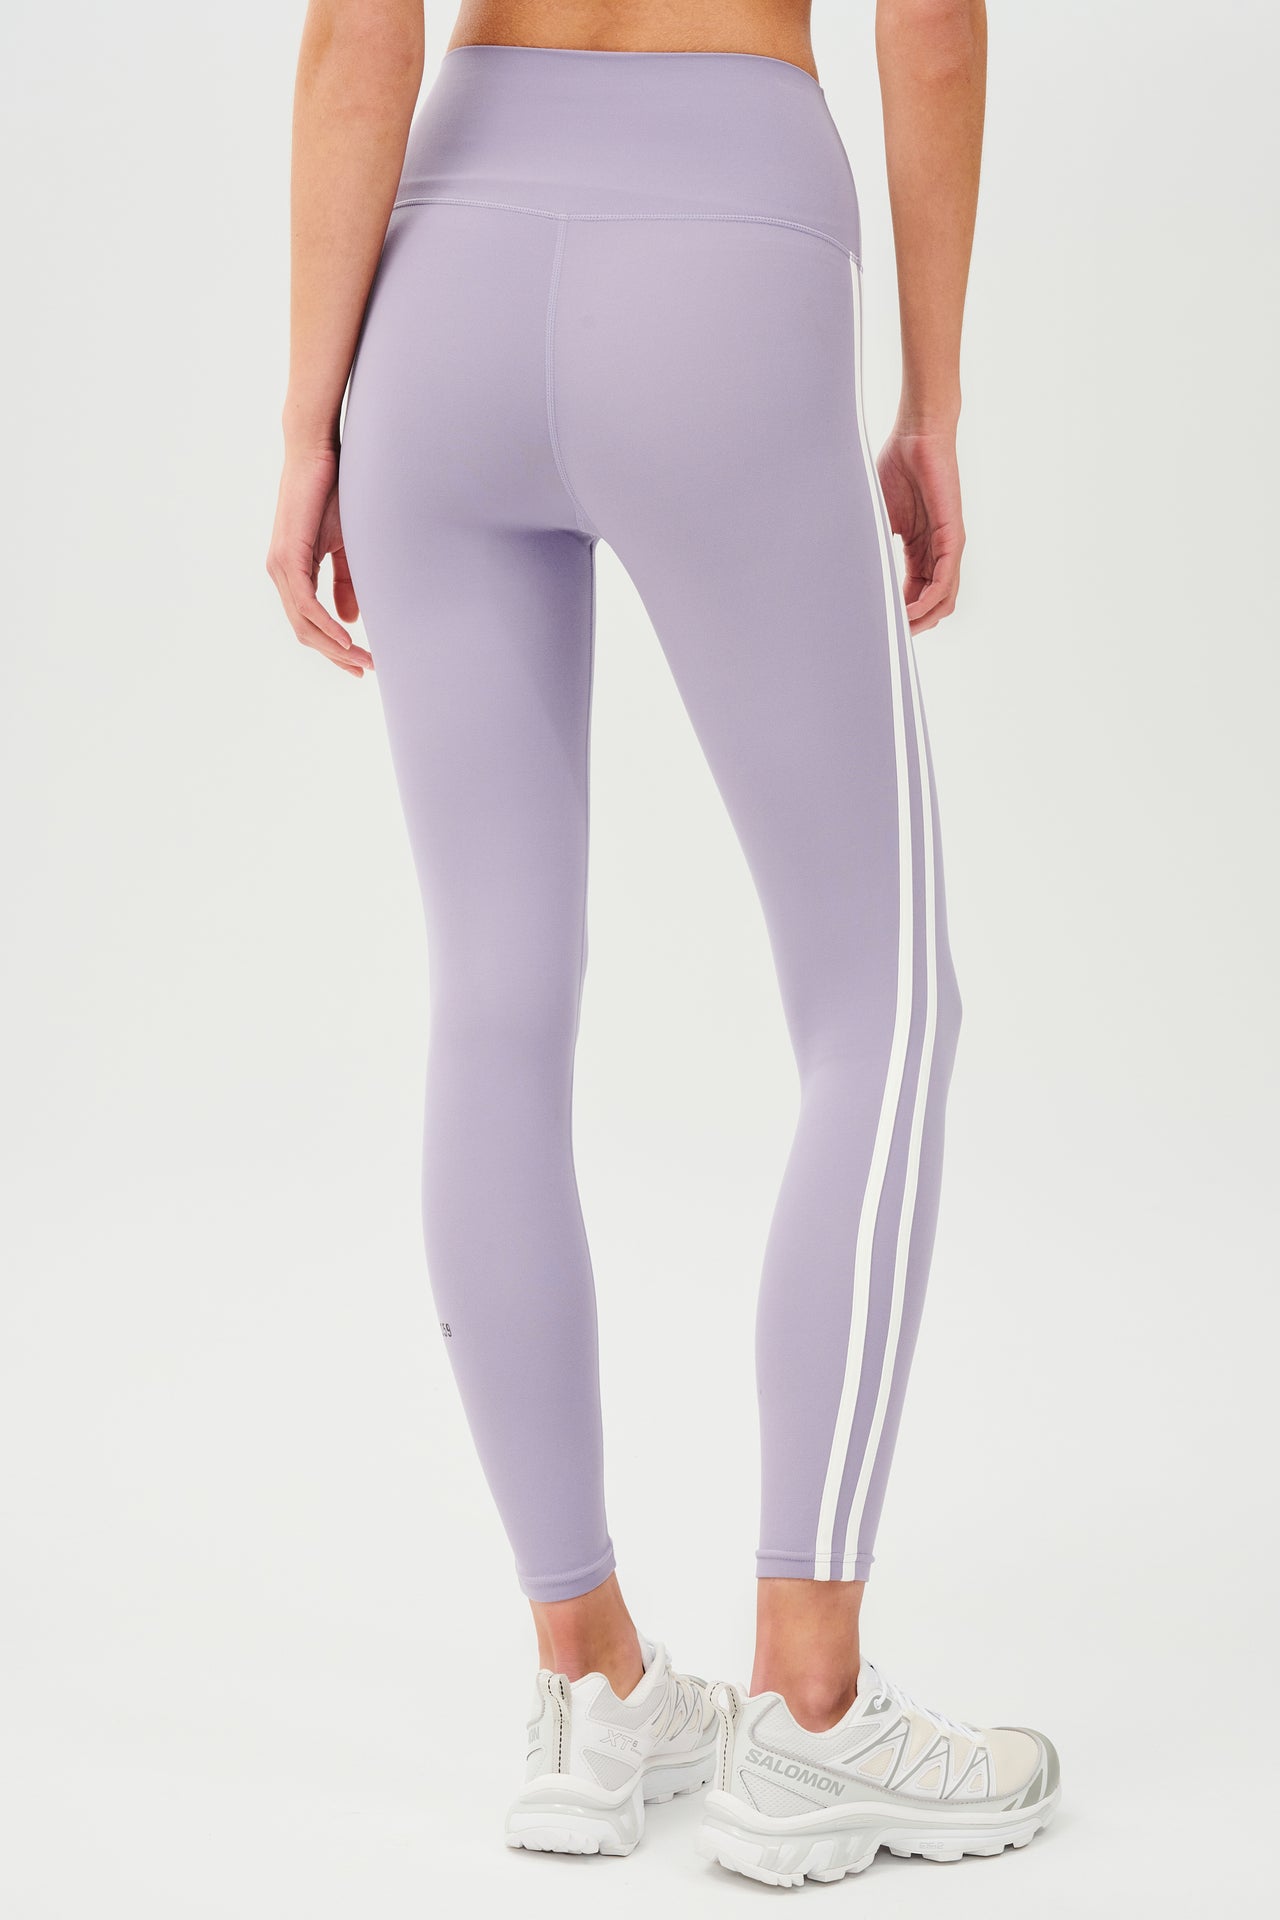 Back view of girl wearing light purple leggings with two thin white stripes down the side with white shoes